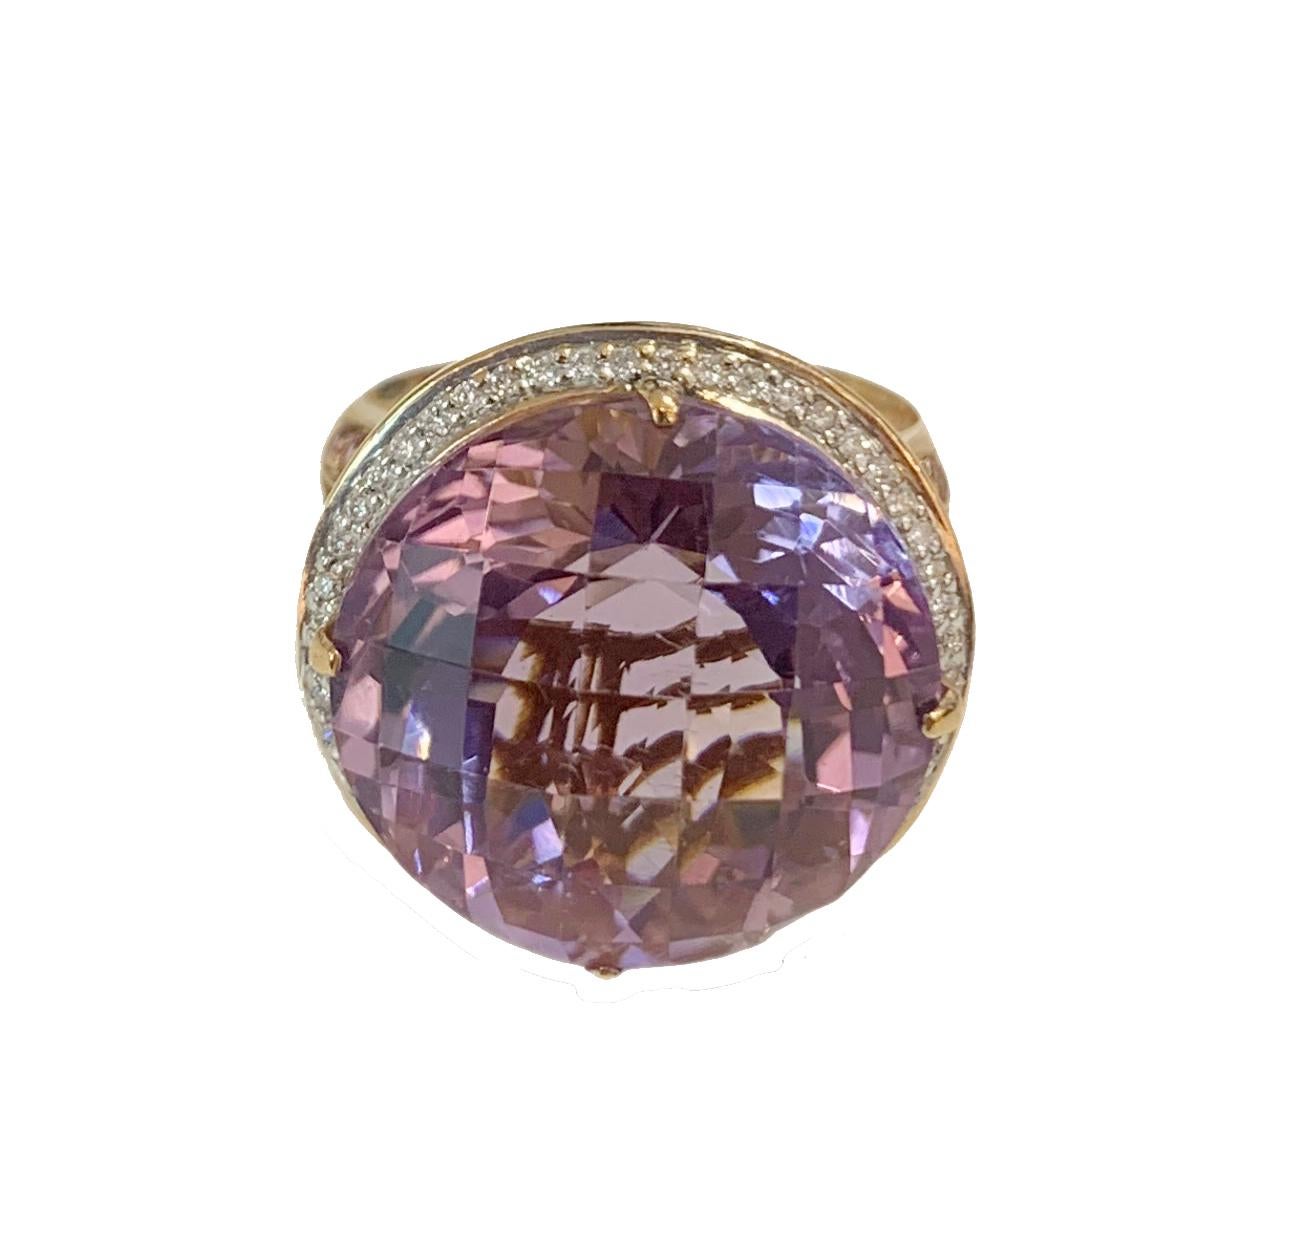 -Custom made

-18k Rose gold

-Ring size: 8, resizable

-Weight: 11gr

-Amethyst: 18mm diameter, 16ct.

-Diamond: 0.5ct, SI/G

-Pink Sapphire: 0.8ct

-Retail: $4500